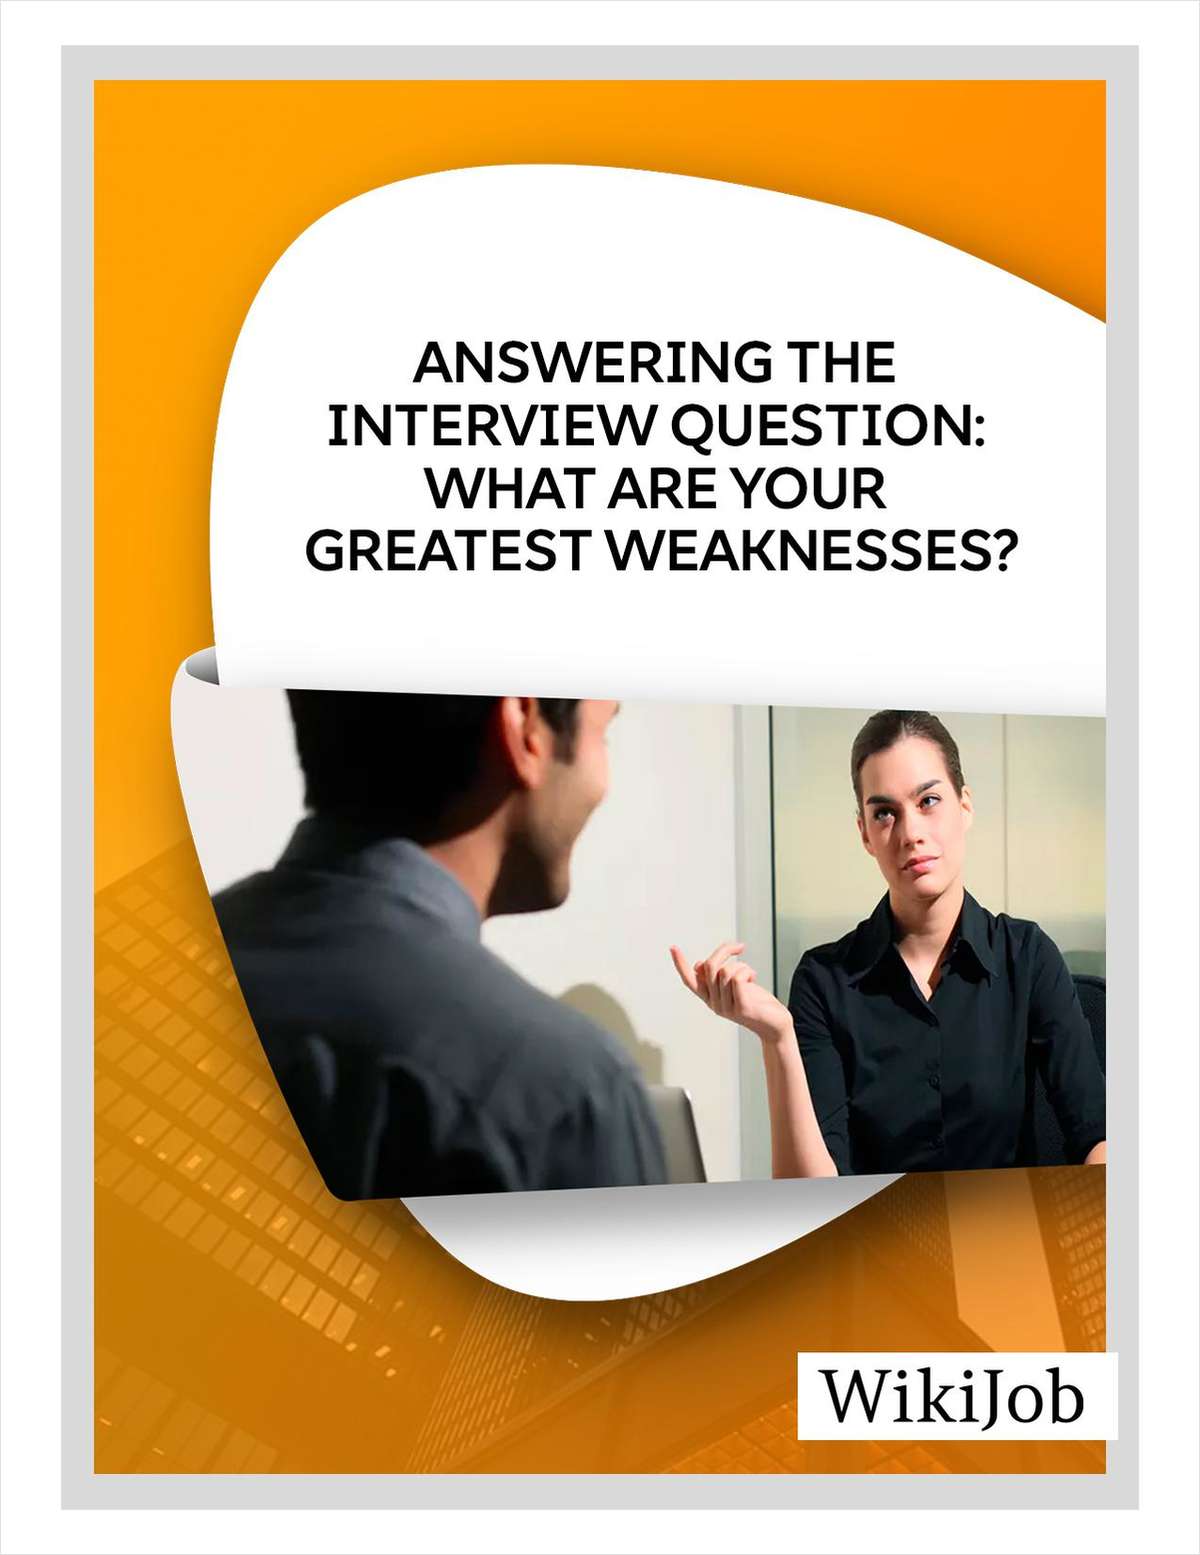 Answering the Question - What are your Greatest Weaknesses?